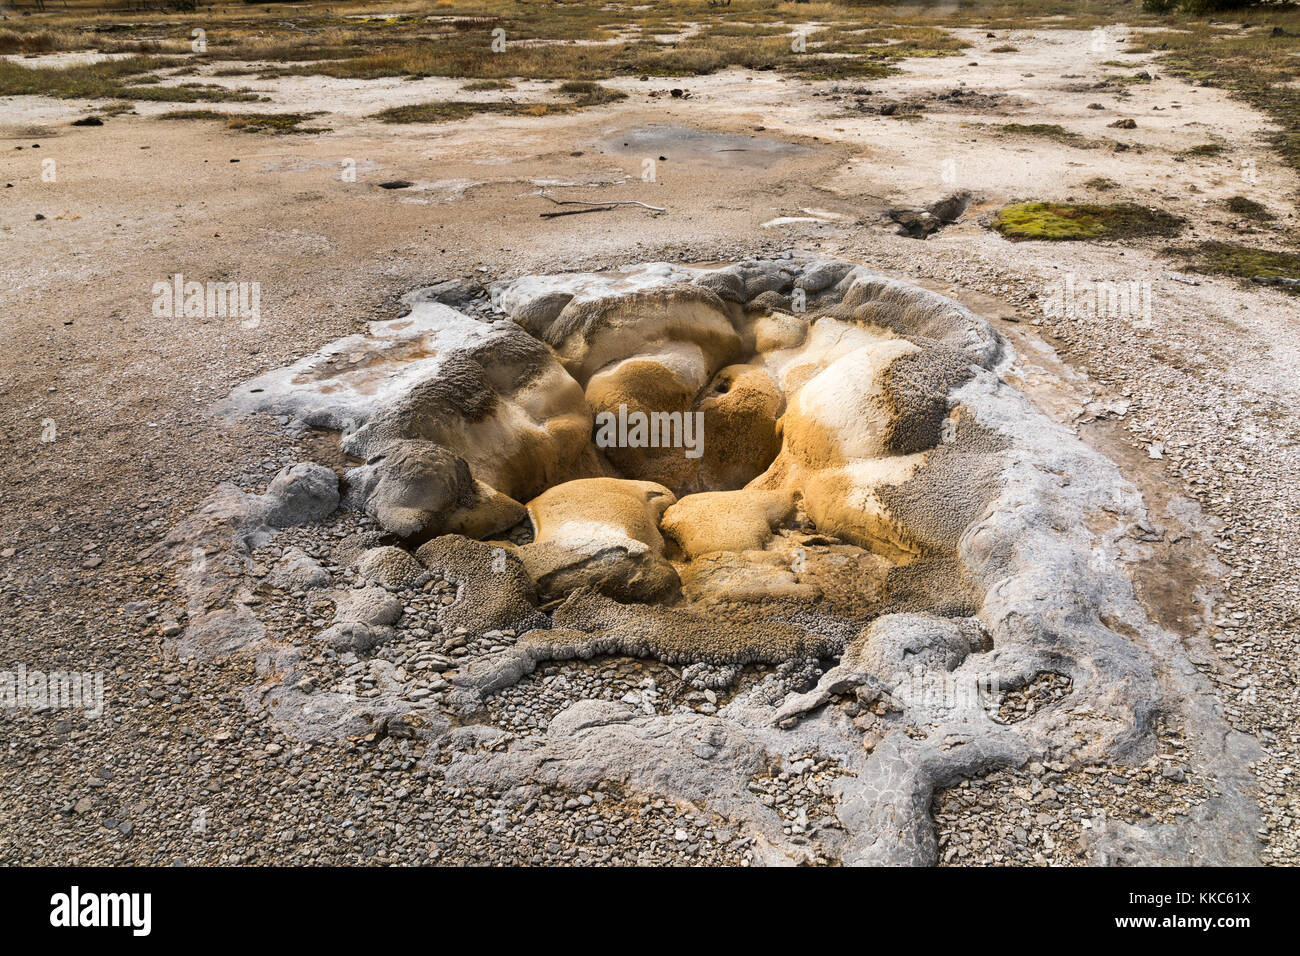 Shell Geyser Thermal Feature in Biscuit Geyser Basin, Yellowstone National Park Stock Photo